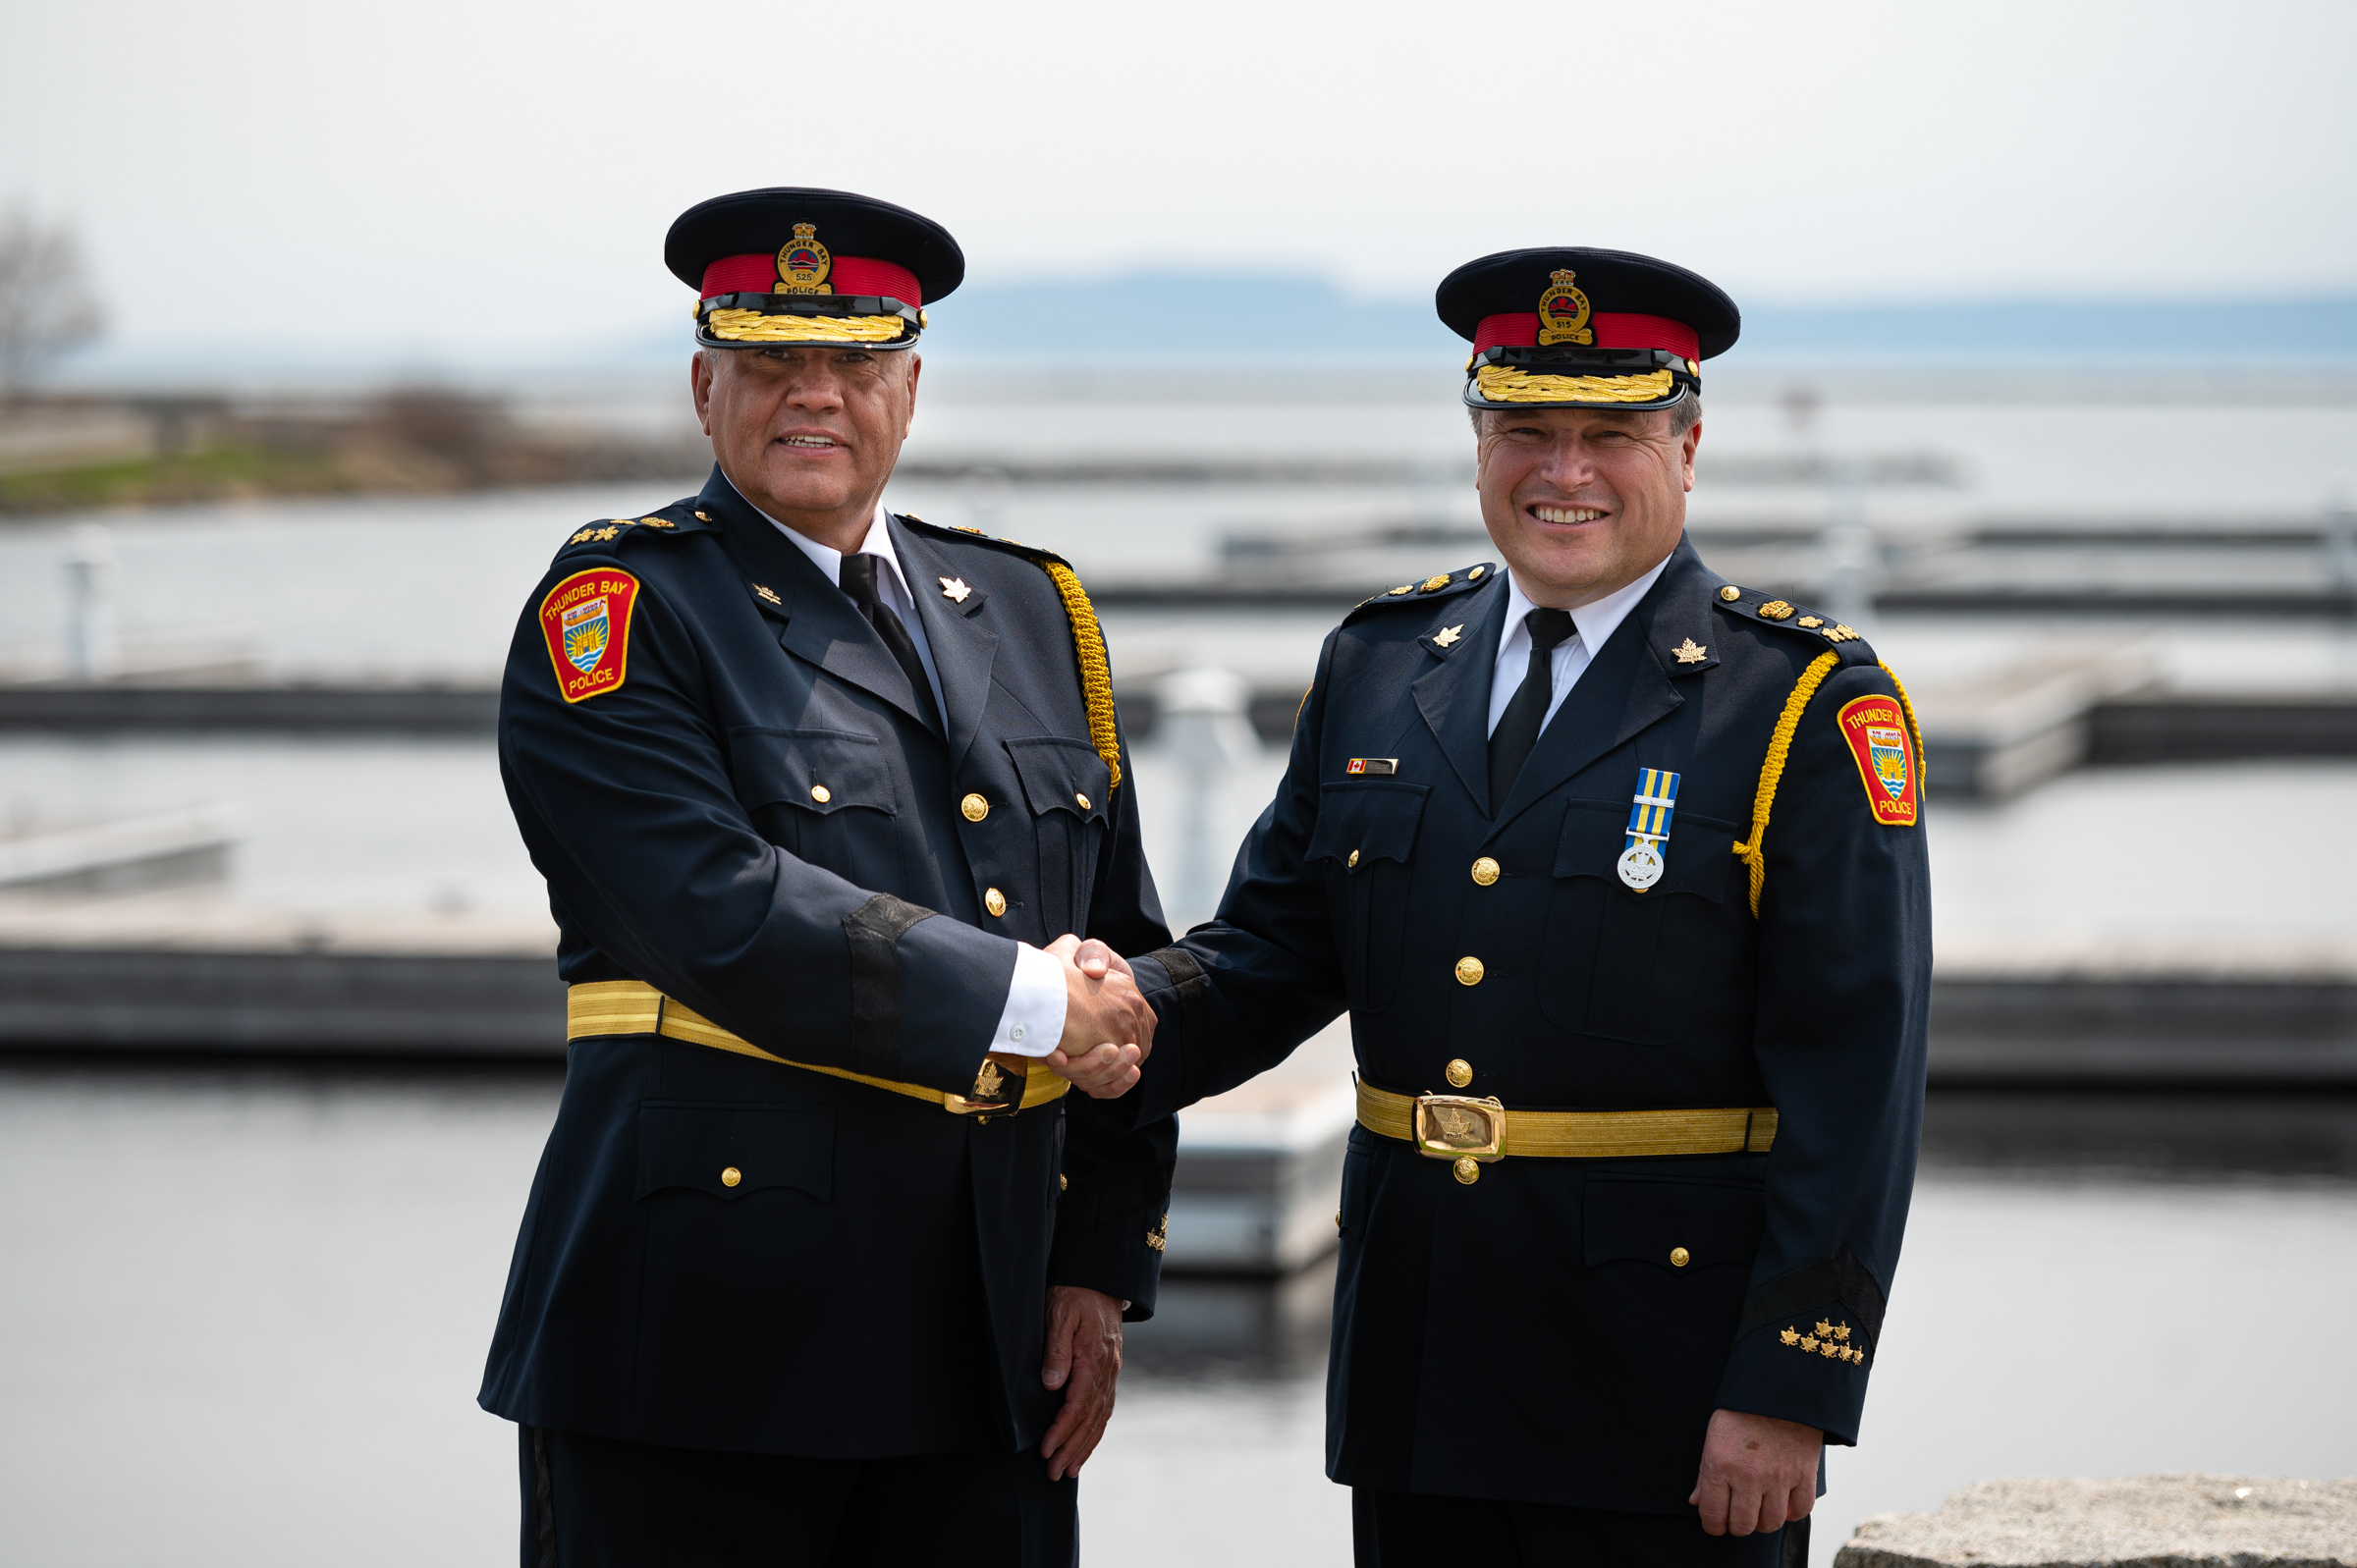 Chief Darcy Fleury with Retired Chief Dan Taddeo